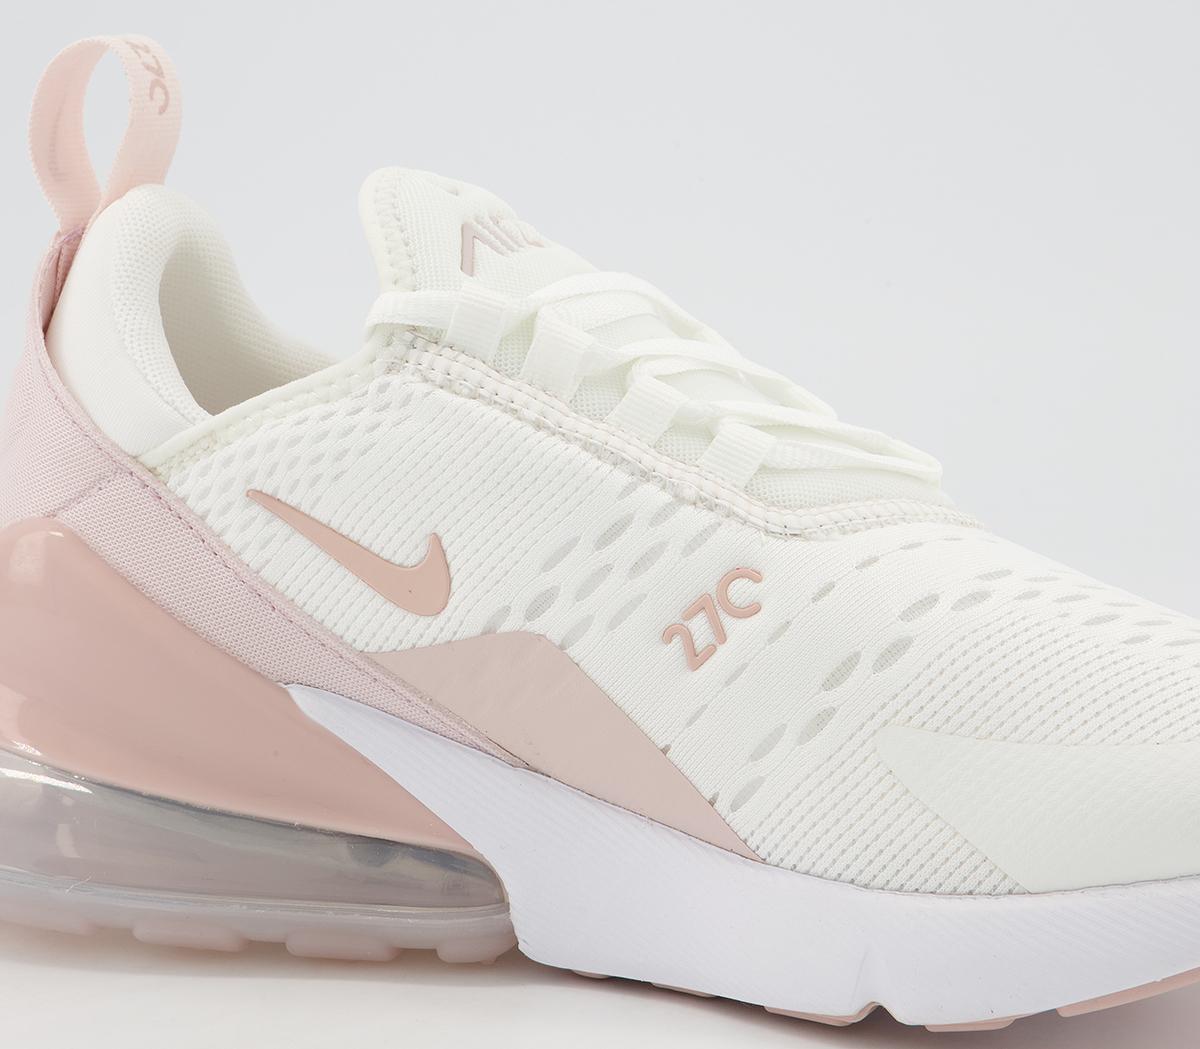 Nike Air Max 270 Trainers Summit White Pink Oxford Barely Rose - Hers